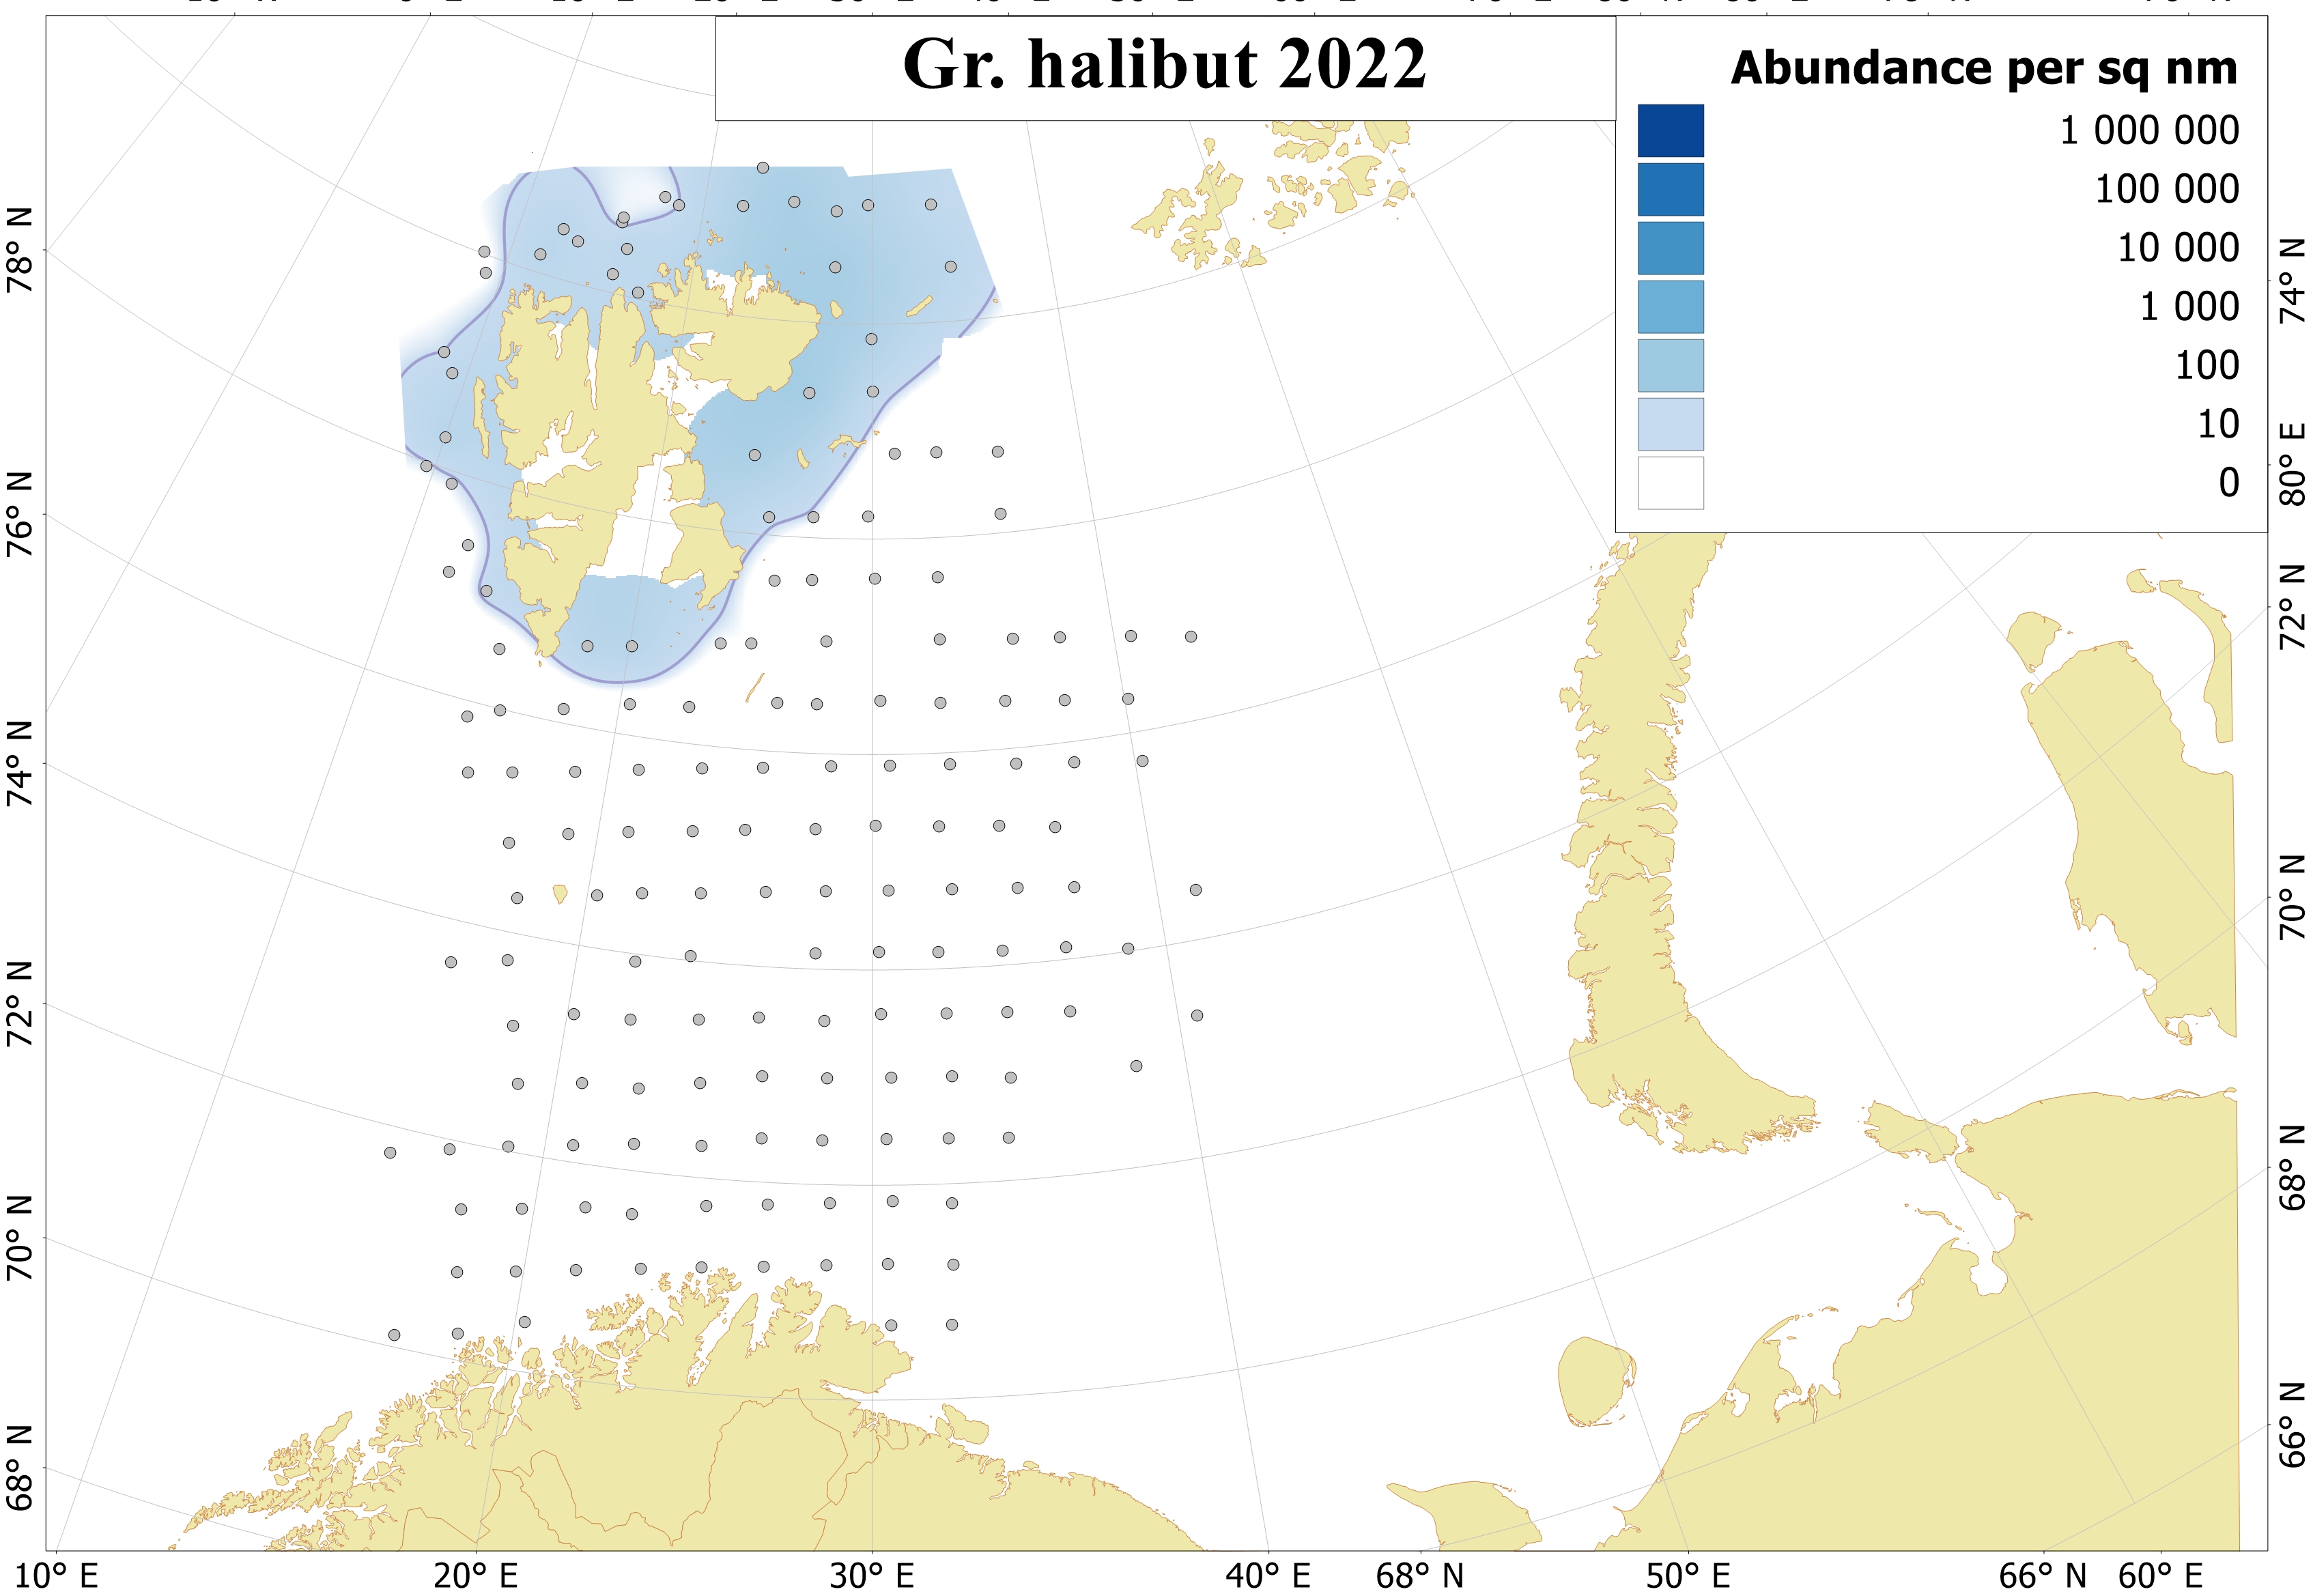 Ch 6 Distribution of 0-group Greenland halibut 2022